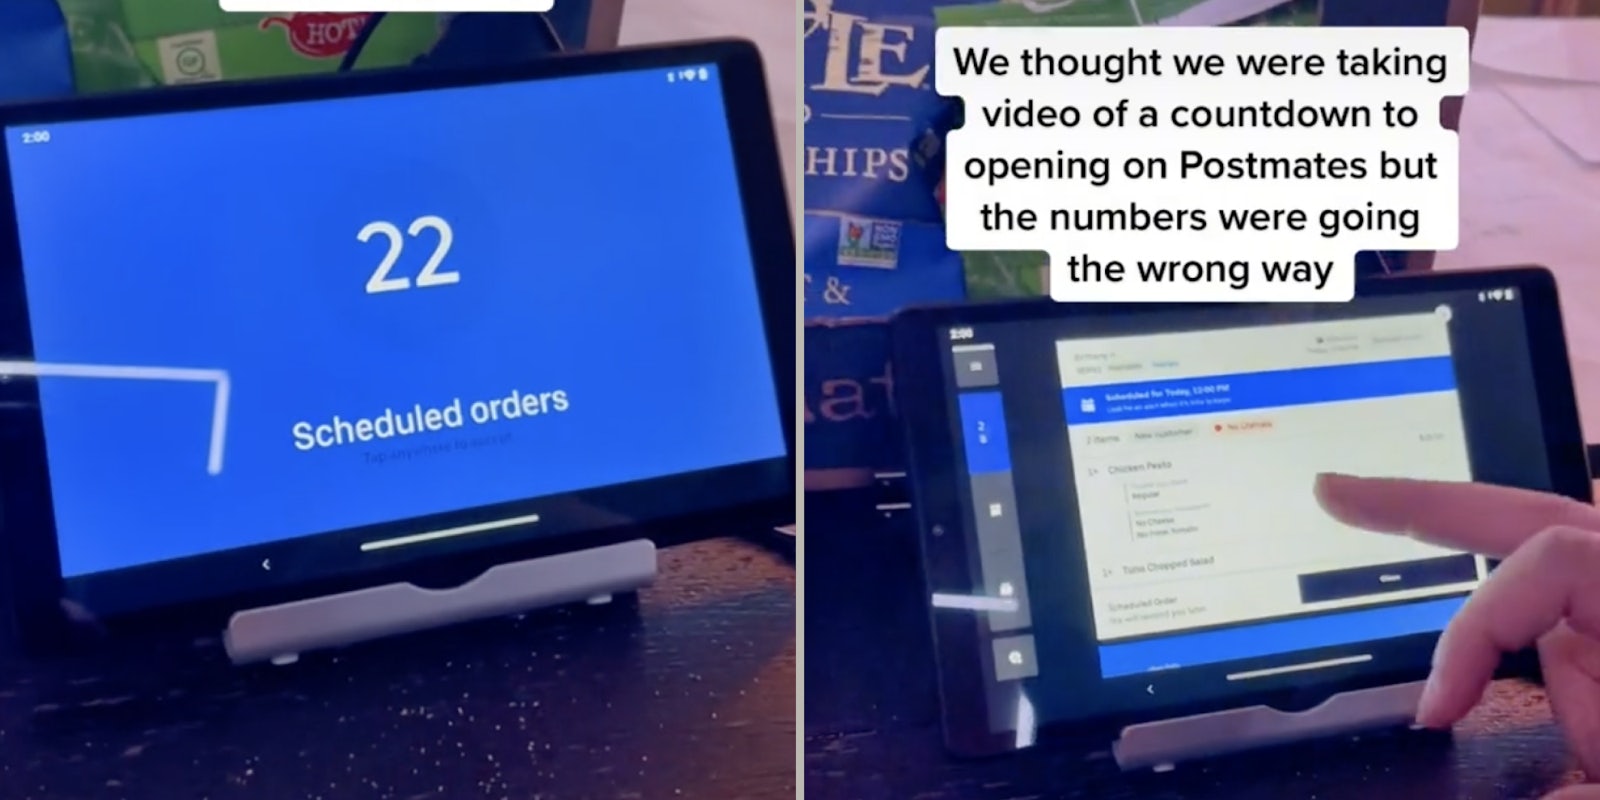 “We thought we were taking a video of a countdown to opening on Postmates but the numbers were going the wrong way.'